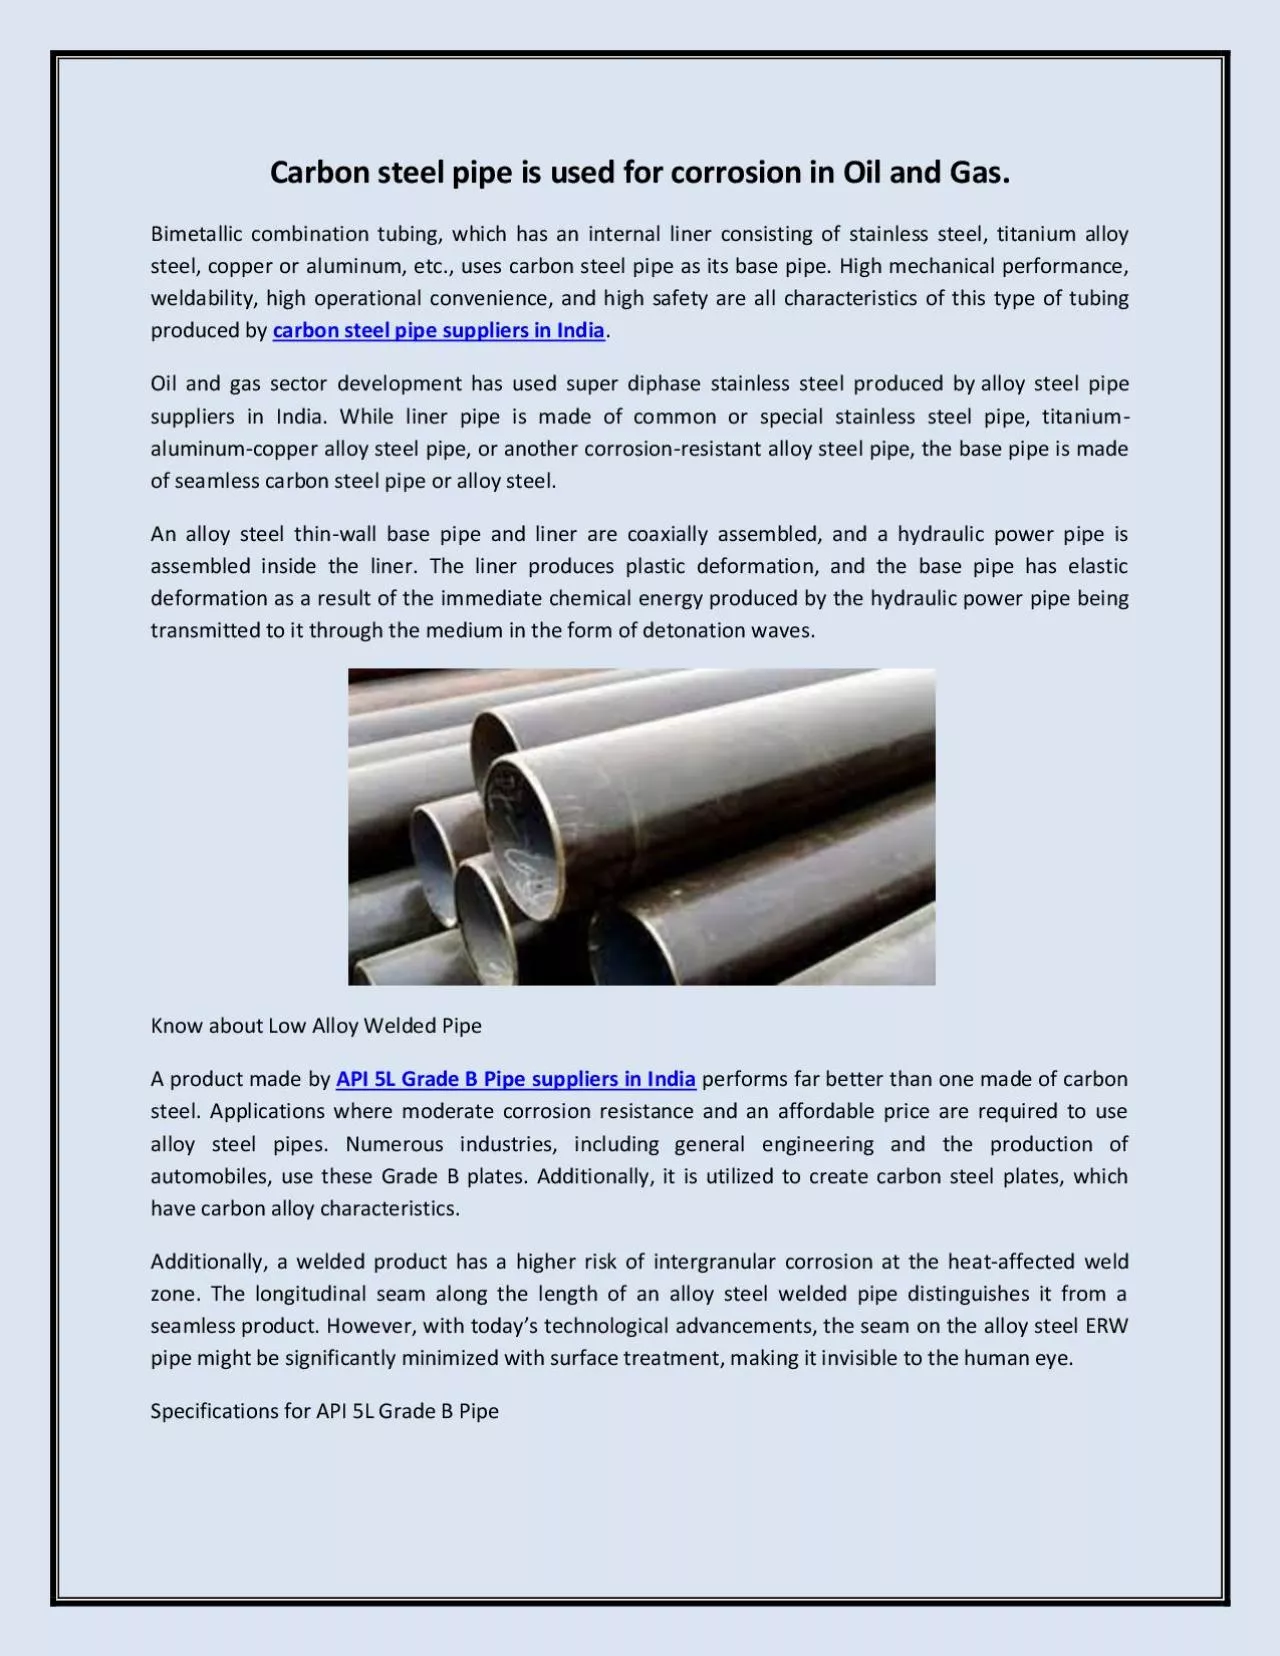 Carbon steel pipe is used for corrosion in Oil and Gas